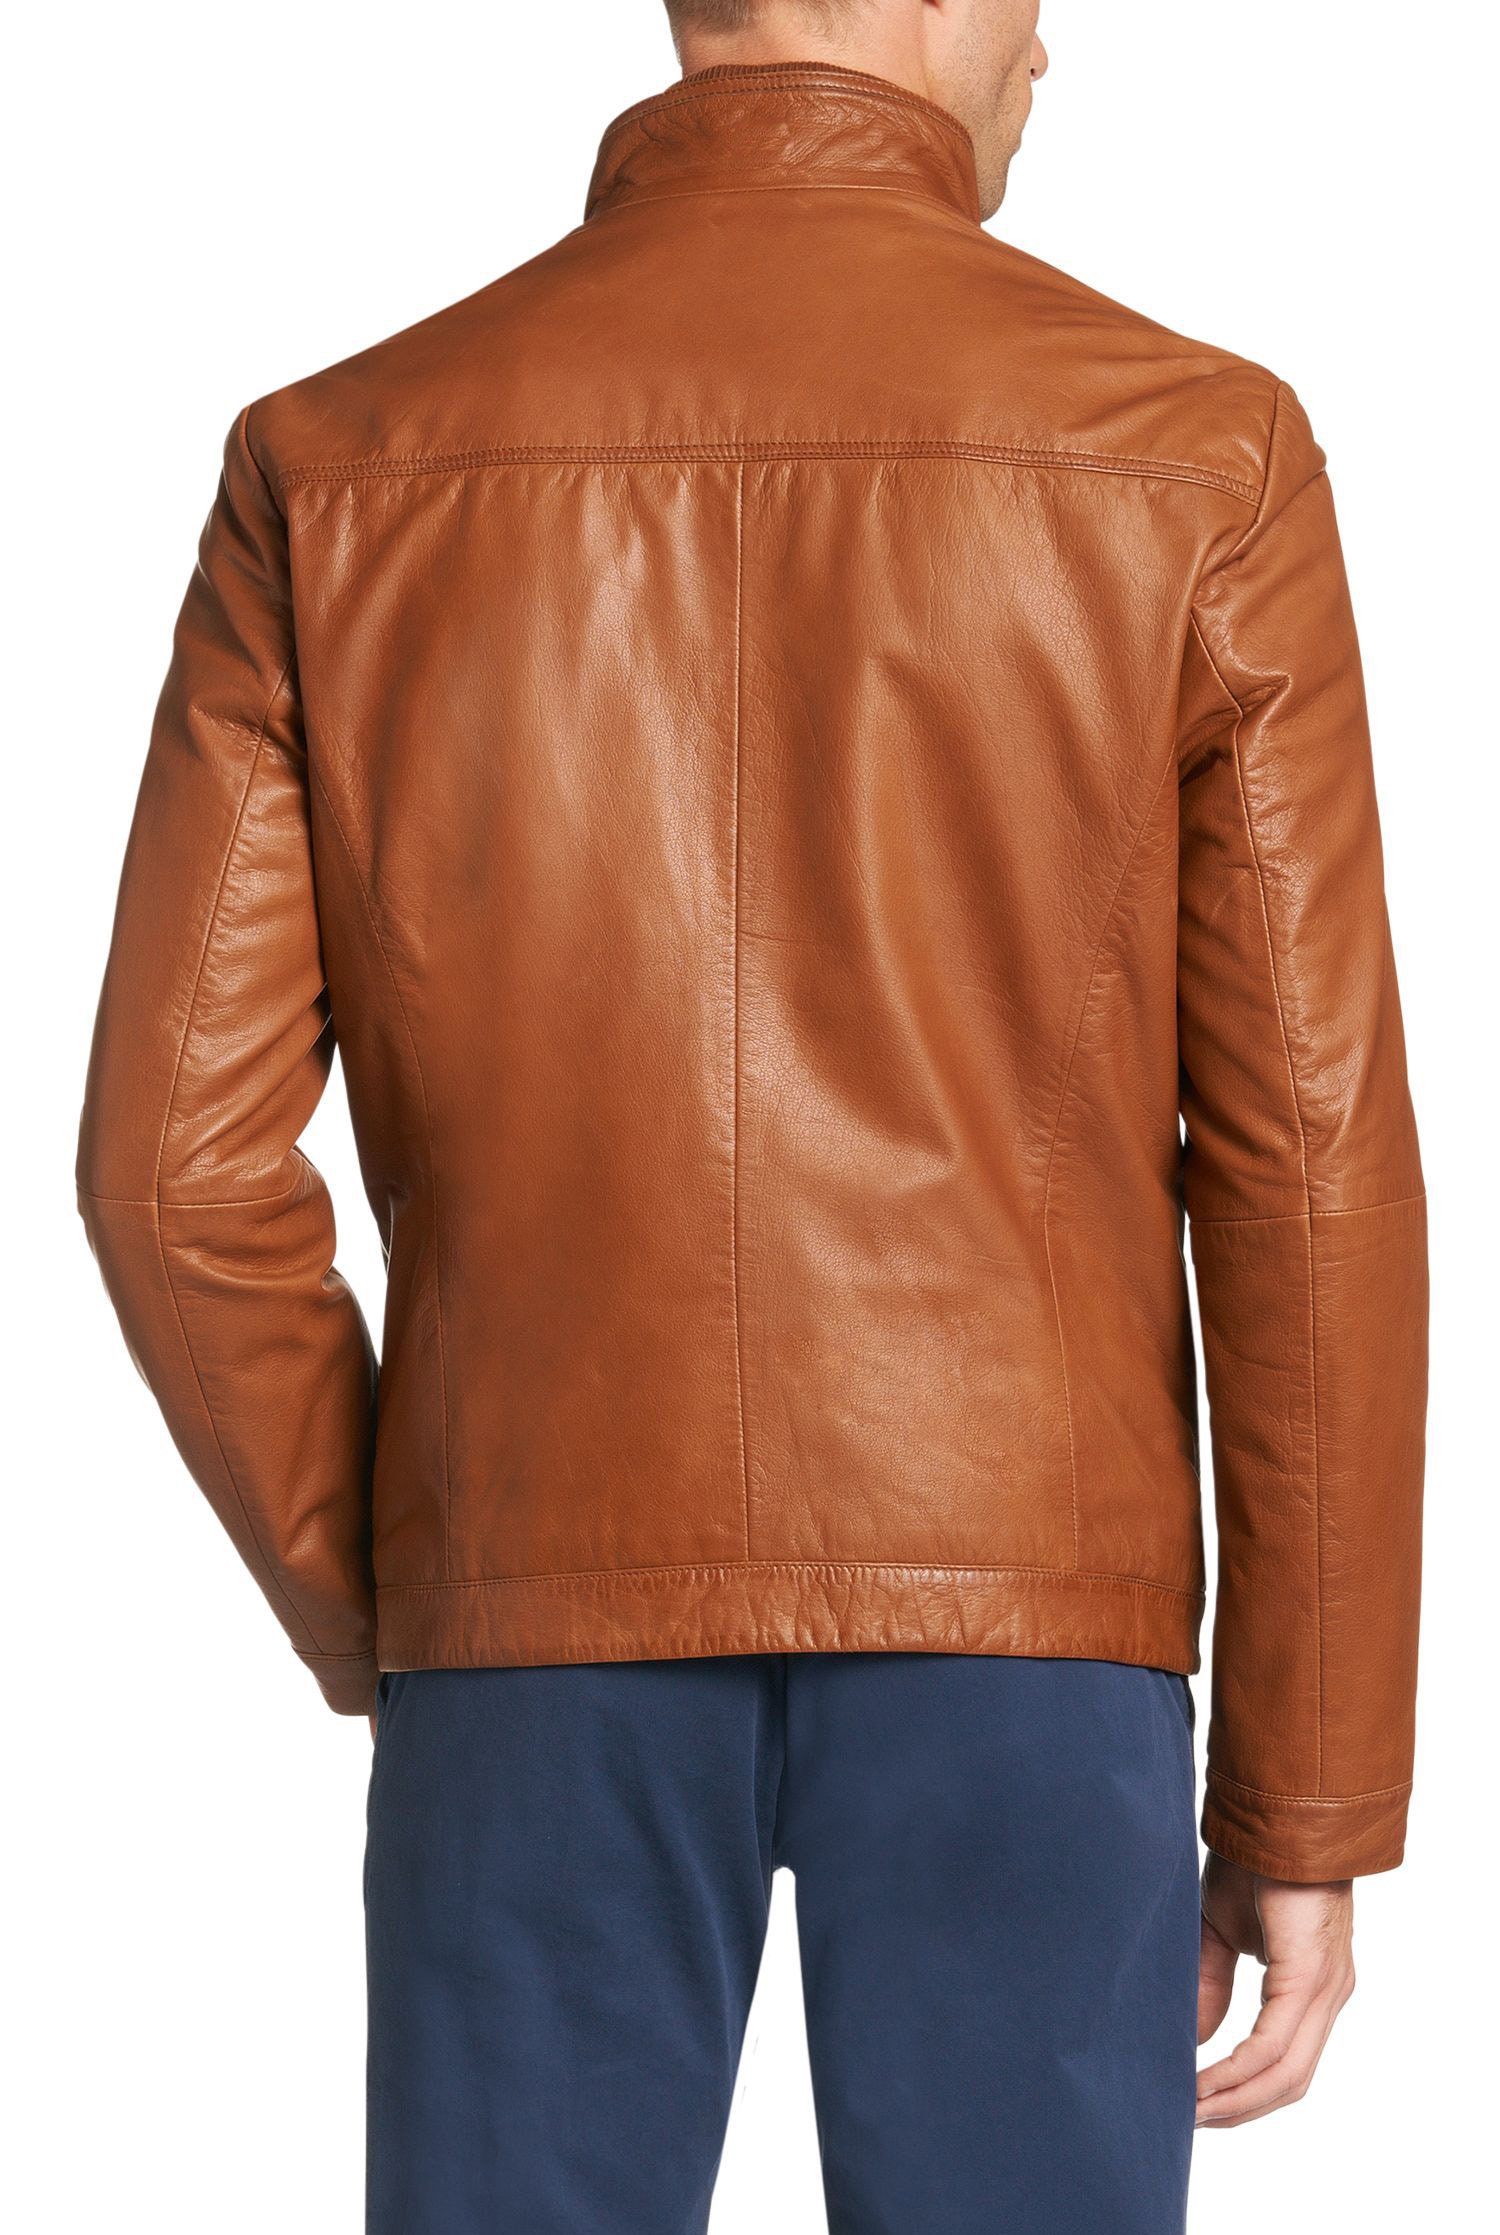 italian leather jackets for men        <h3 class=